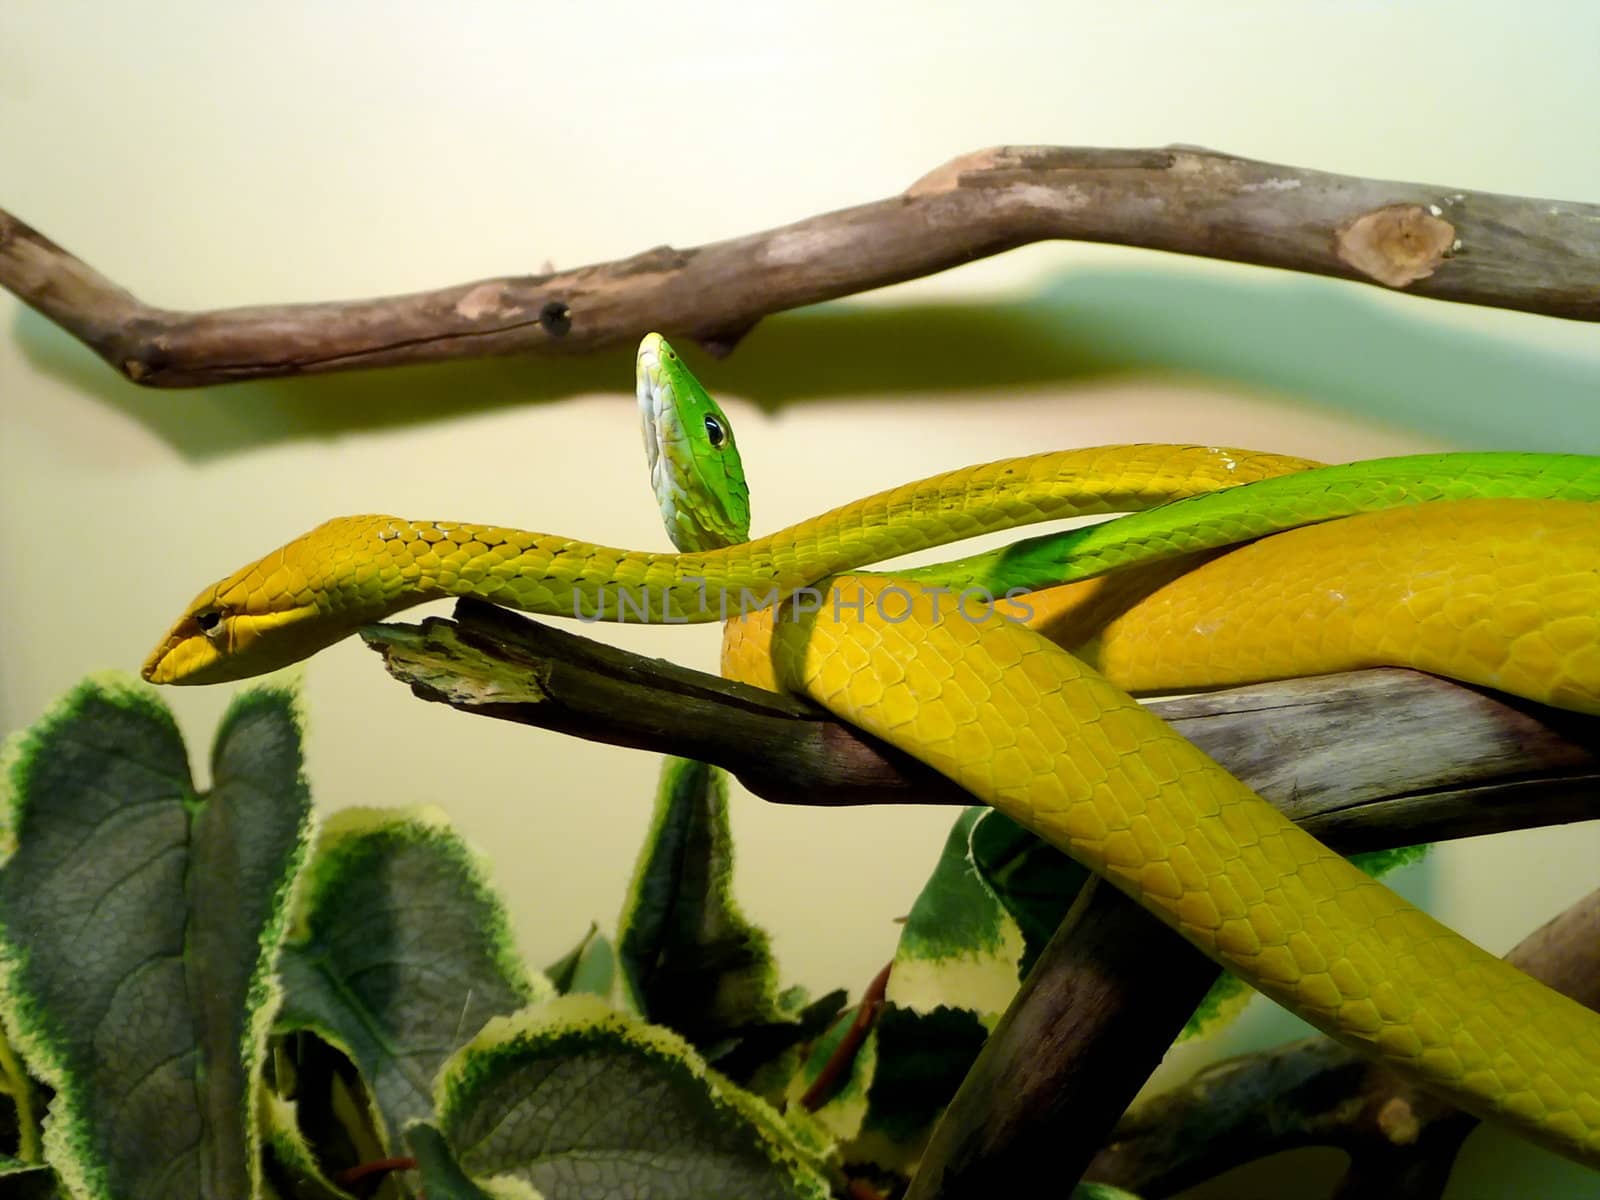 Pair of green thin snakes with plat heads